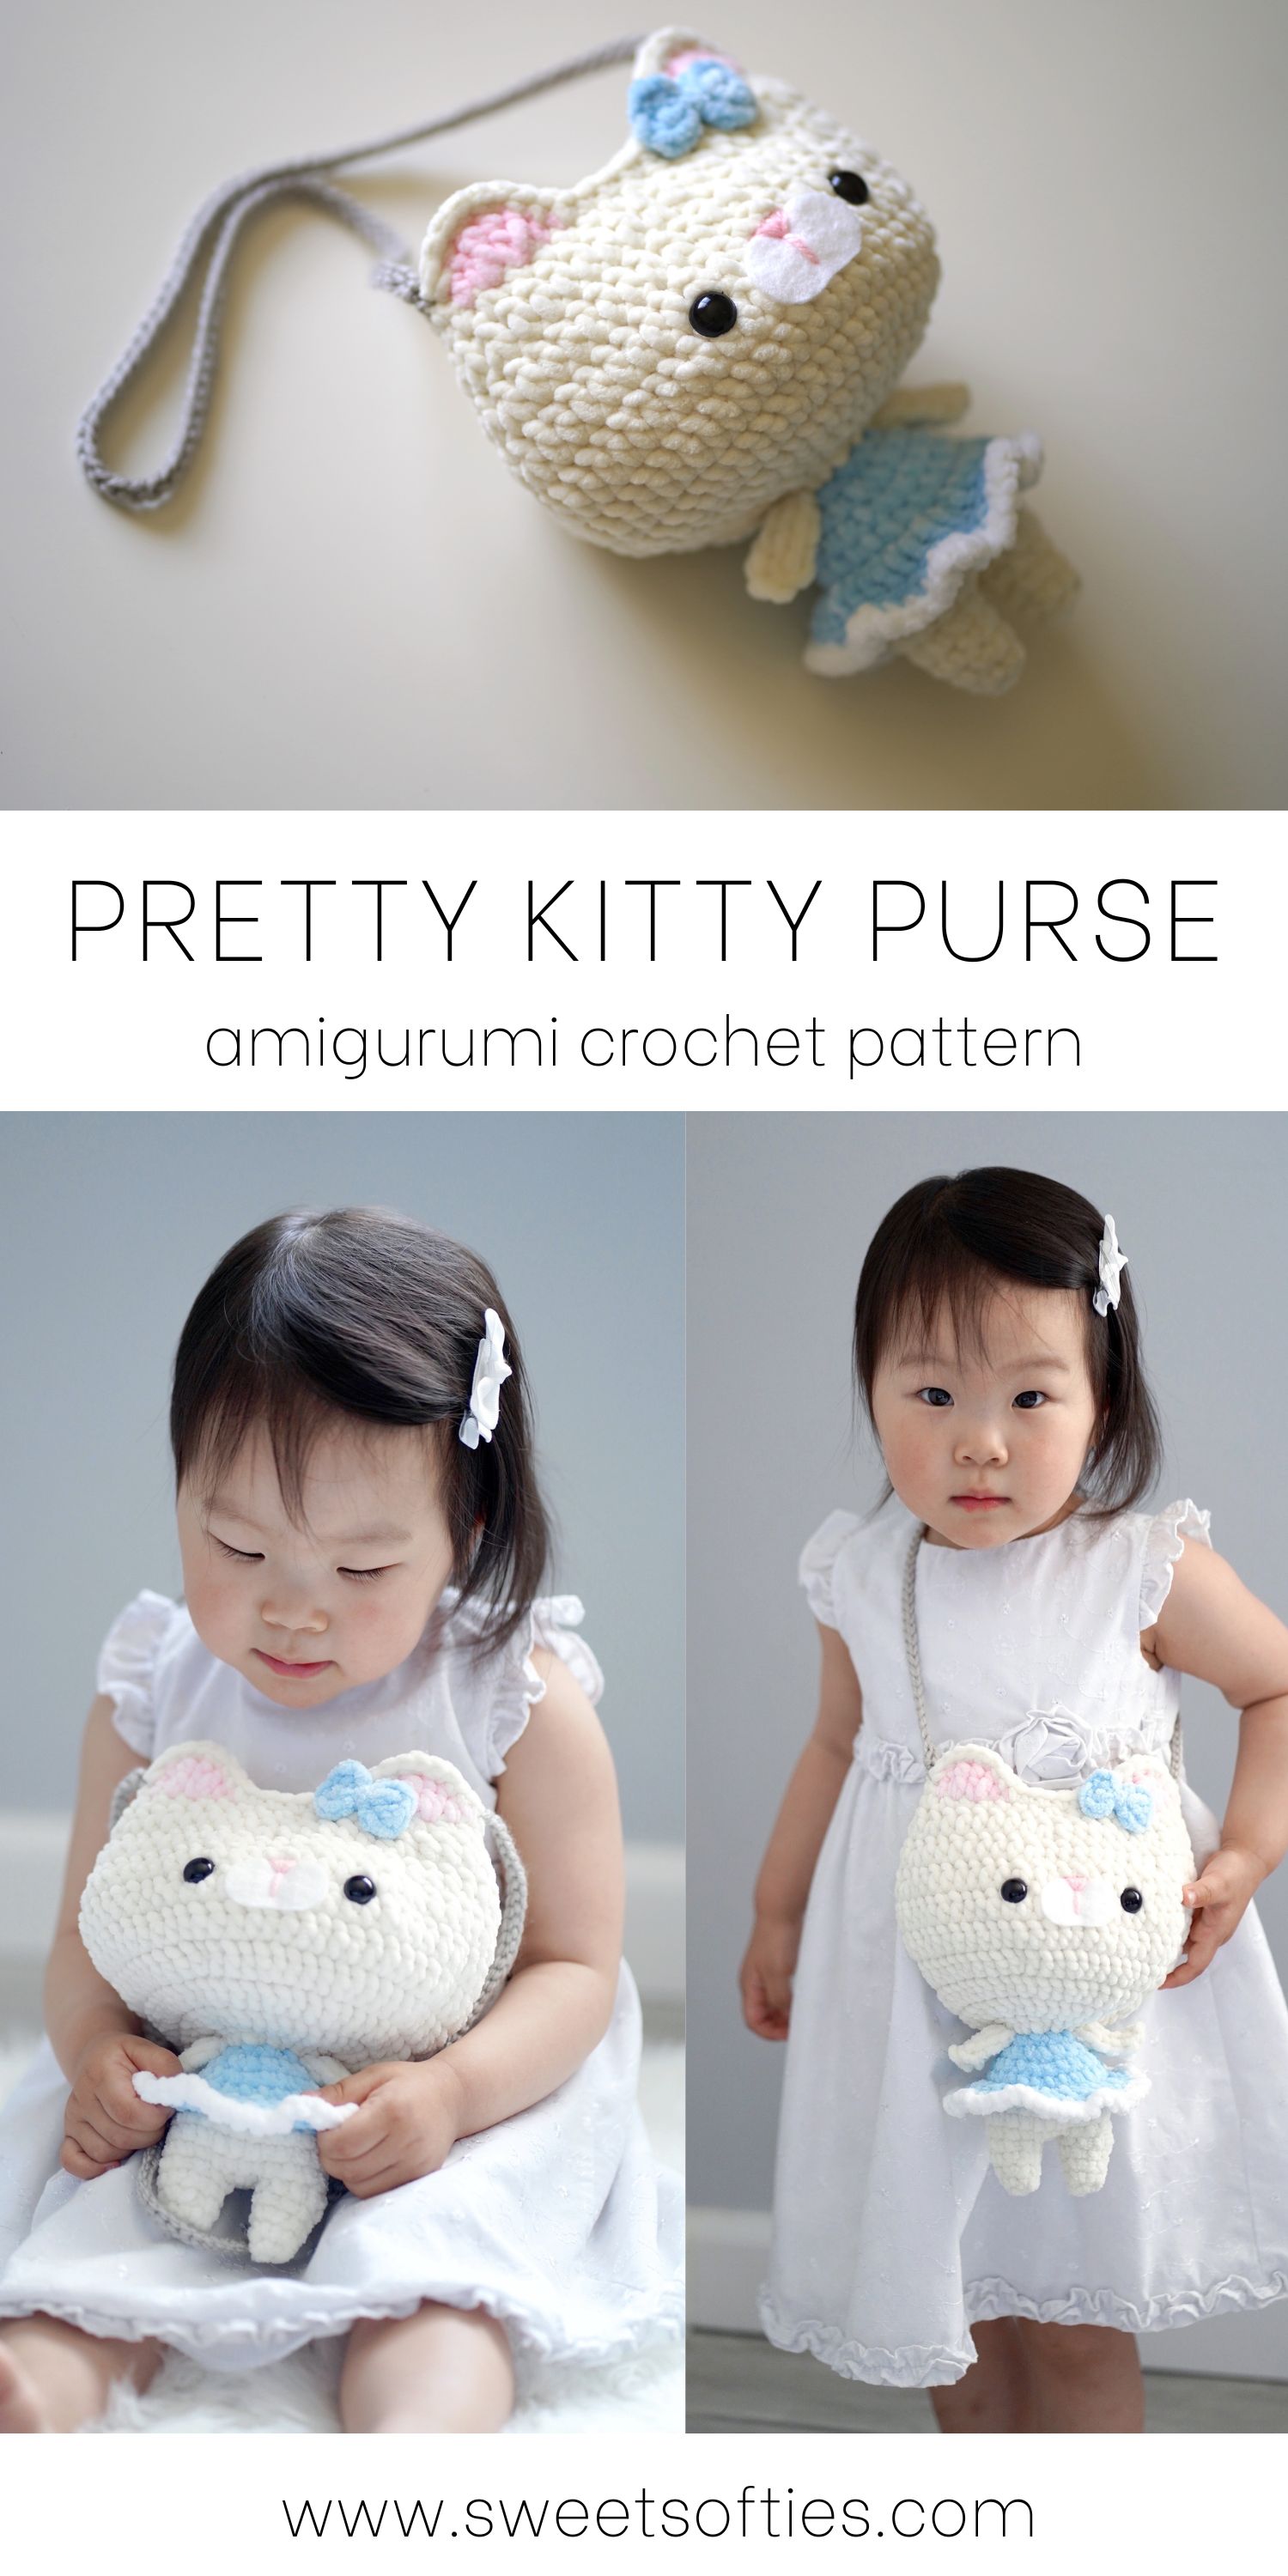 How to Make a Cute Crochet Cat Bag- Free Crochet Kitty Purse Pattern - A  Crafty Concept